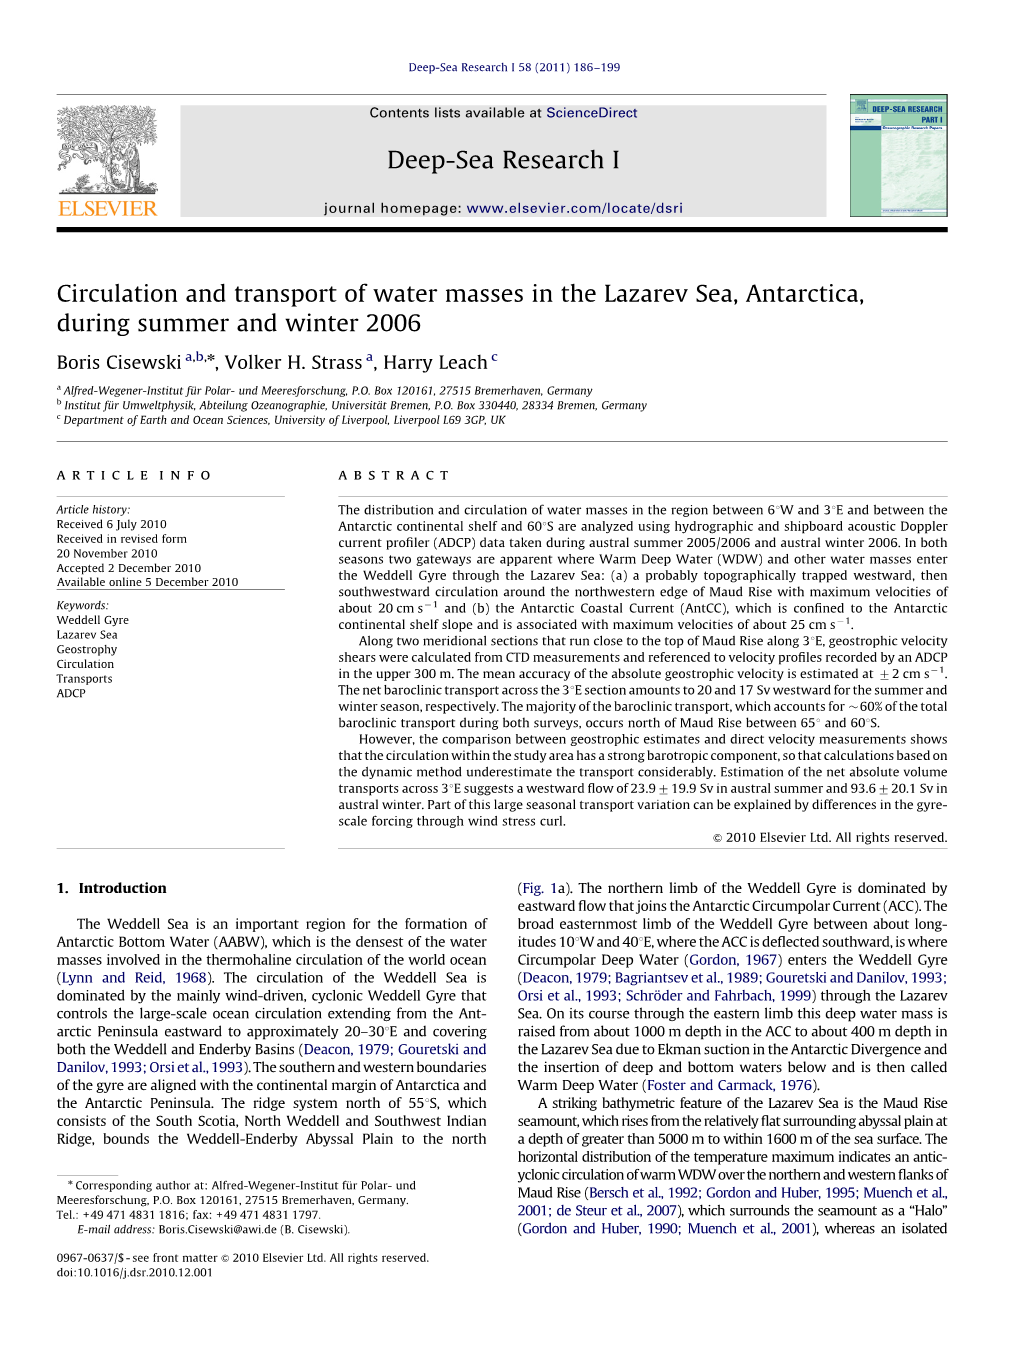 Circulation and Transport of Water Masses in the Lazarev Sea, Antarctica, During Summer and Winter 2006